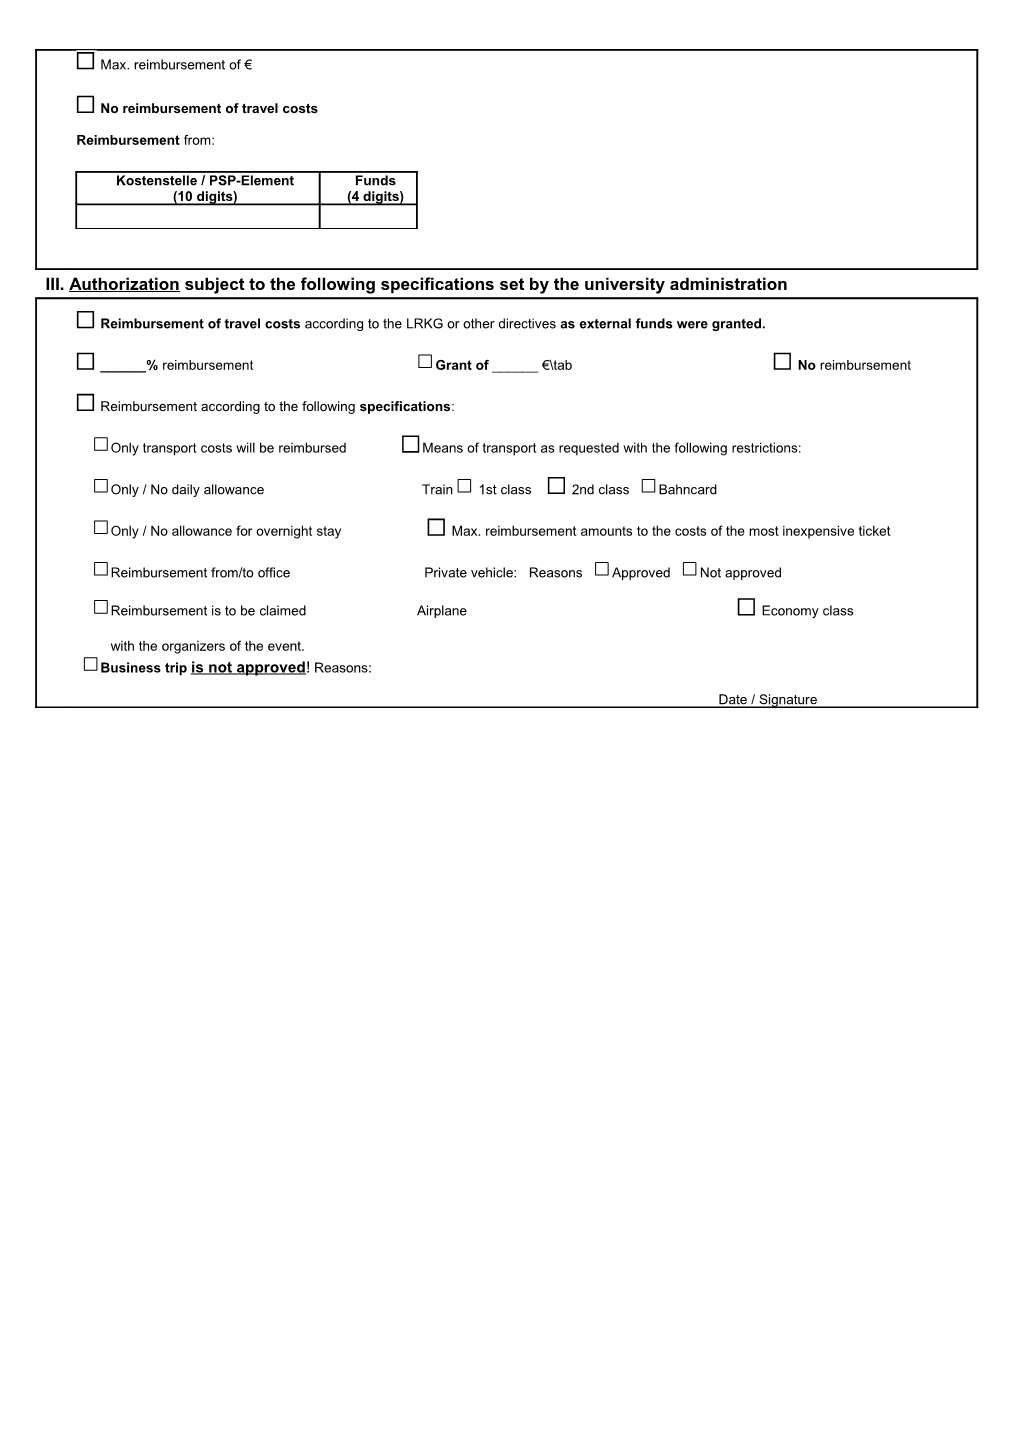 Please Submit This Form in Duplicate, a Photocopy Suffices.